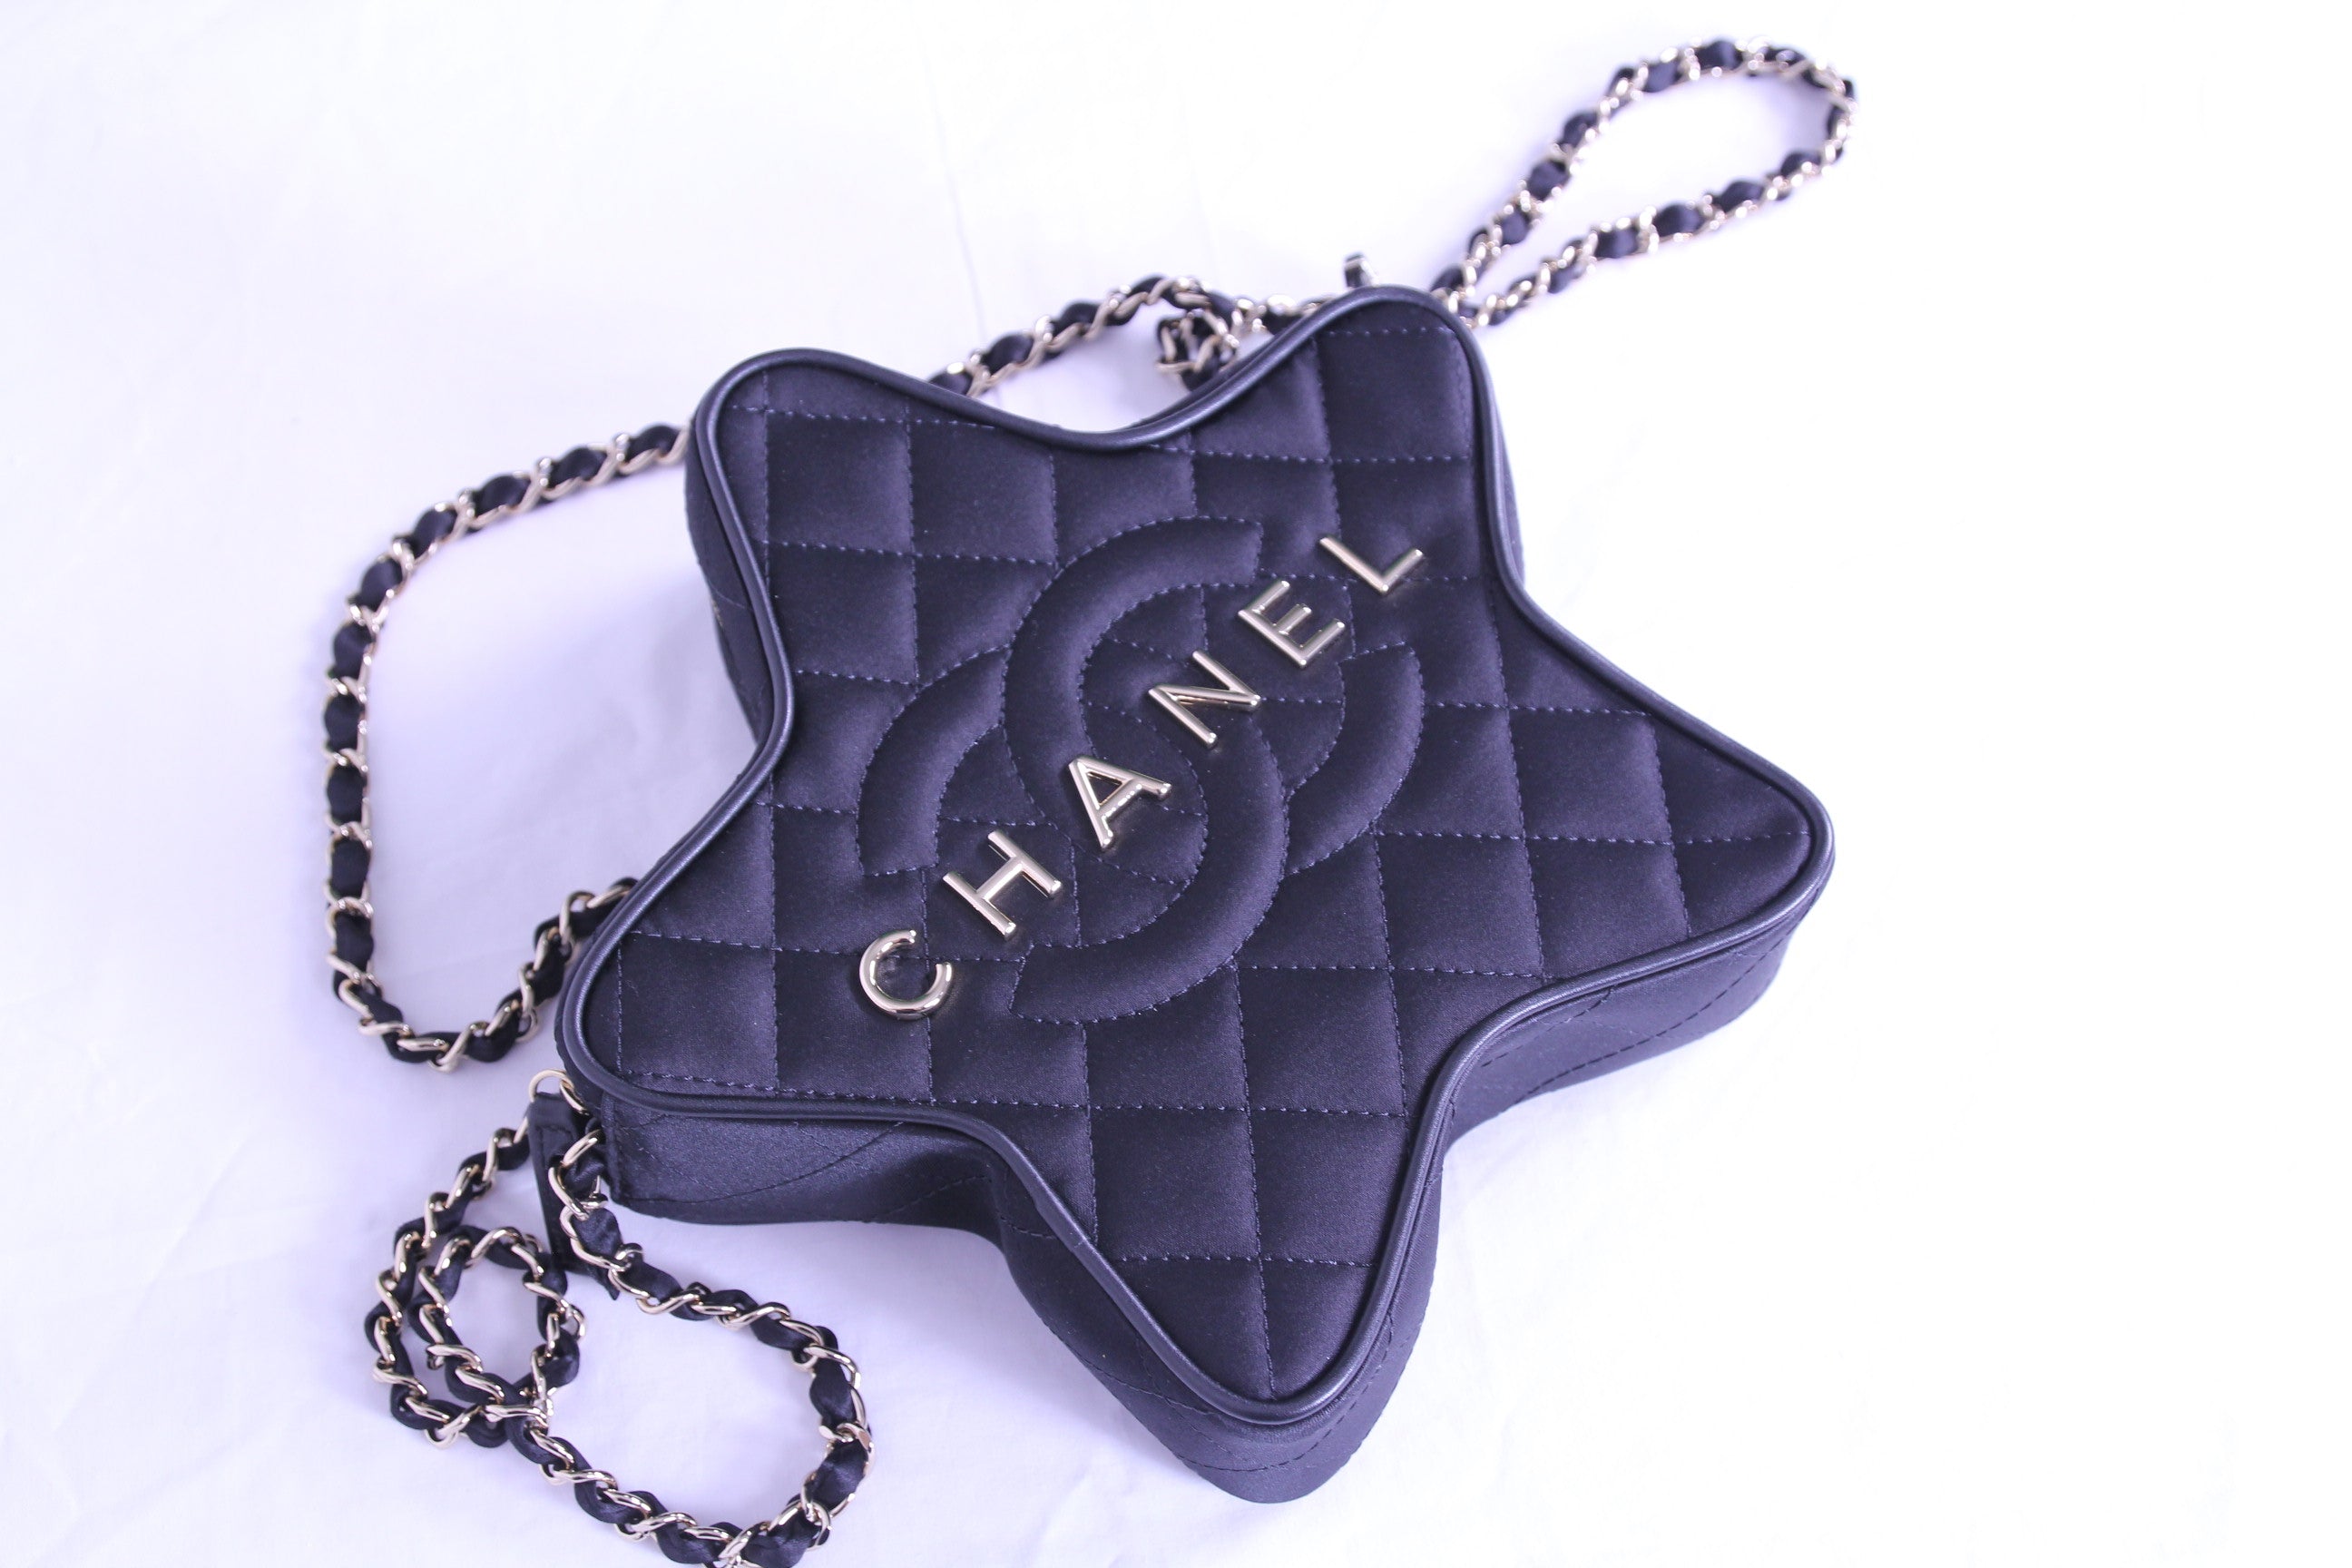 Front of Chanel star handbag in finished in black satin with chain